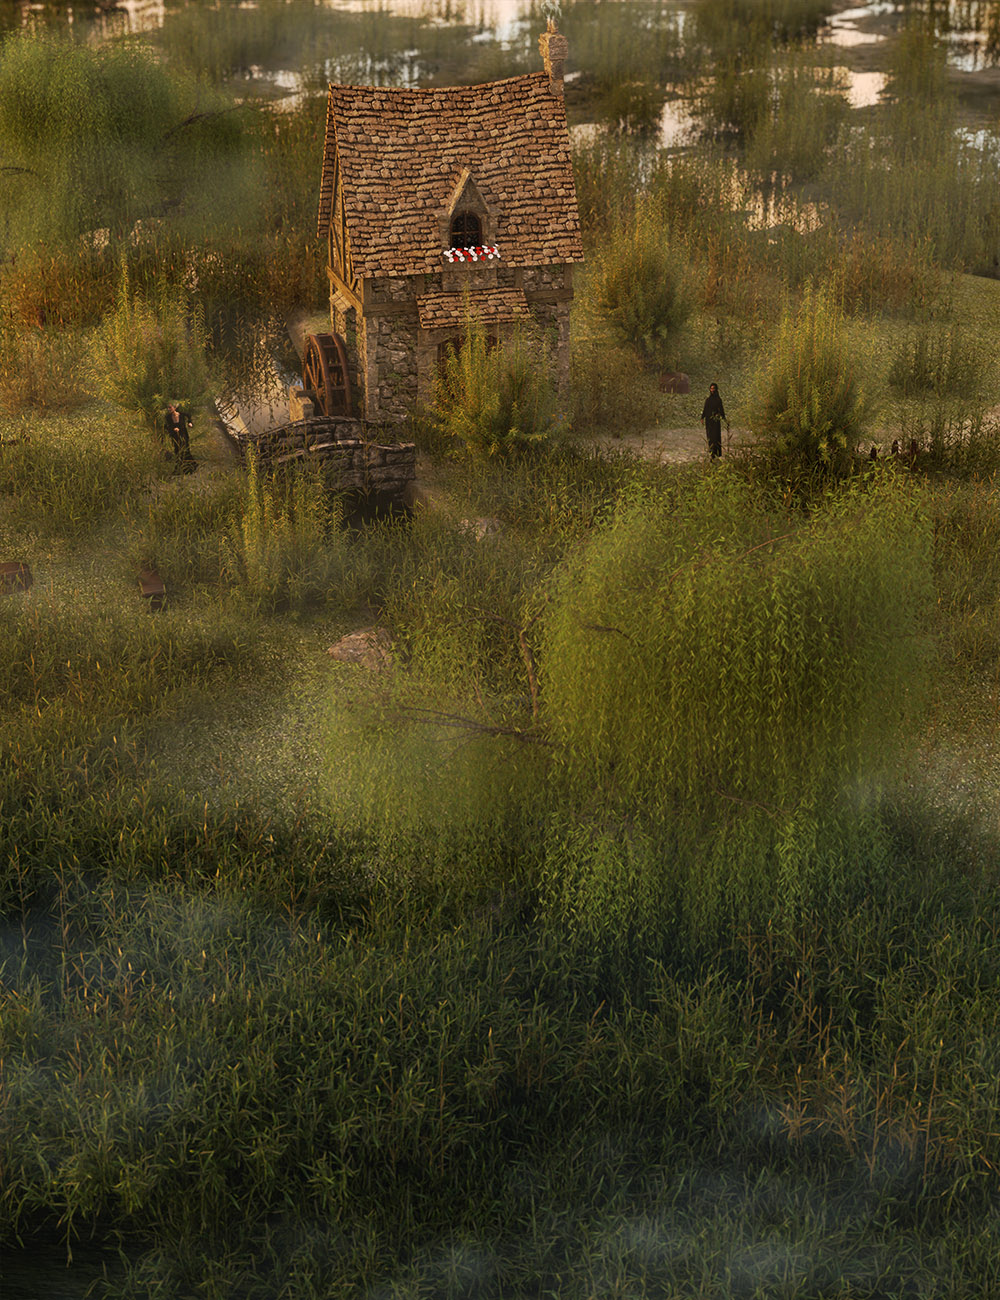 Wetlands Low Res Plants for Vol 1 - Reedbeds by: MartinJFrost, 3D Models by Daz 3D